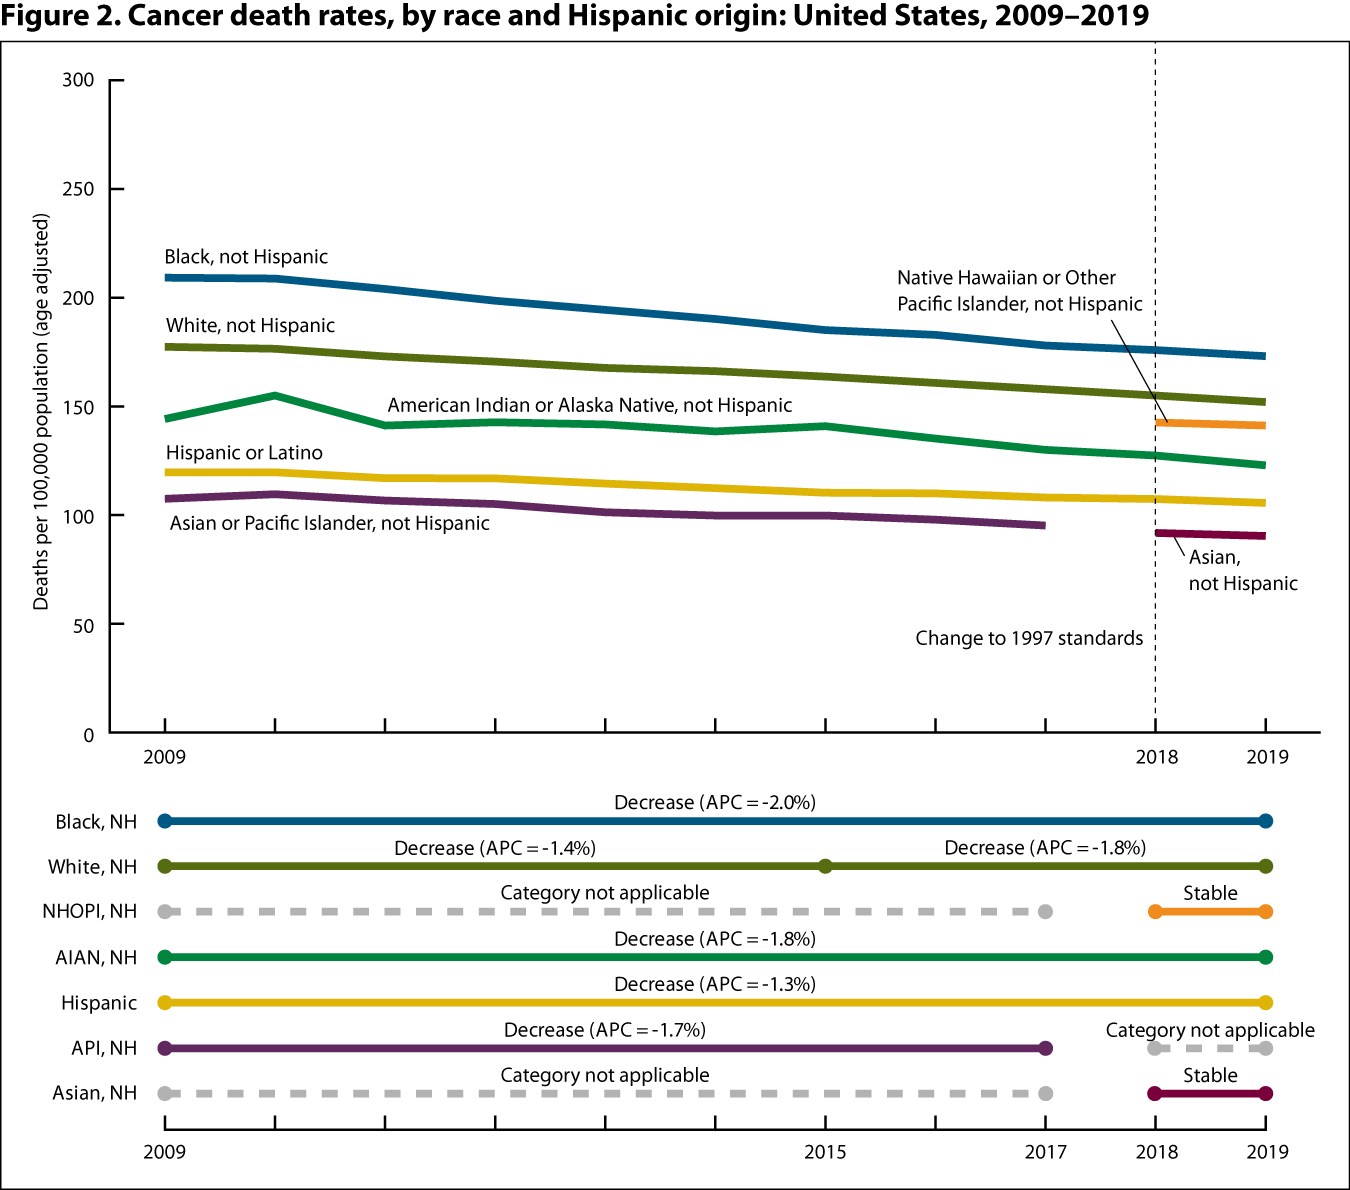 Figure 2 is a line graph showing cancer death rates (deaths per 100,000 population) by race and Hispanic origin for 2009 through 2019.